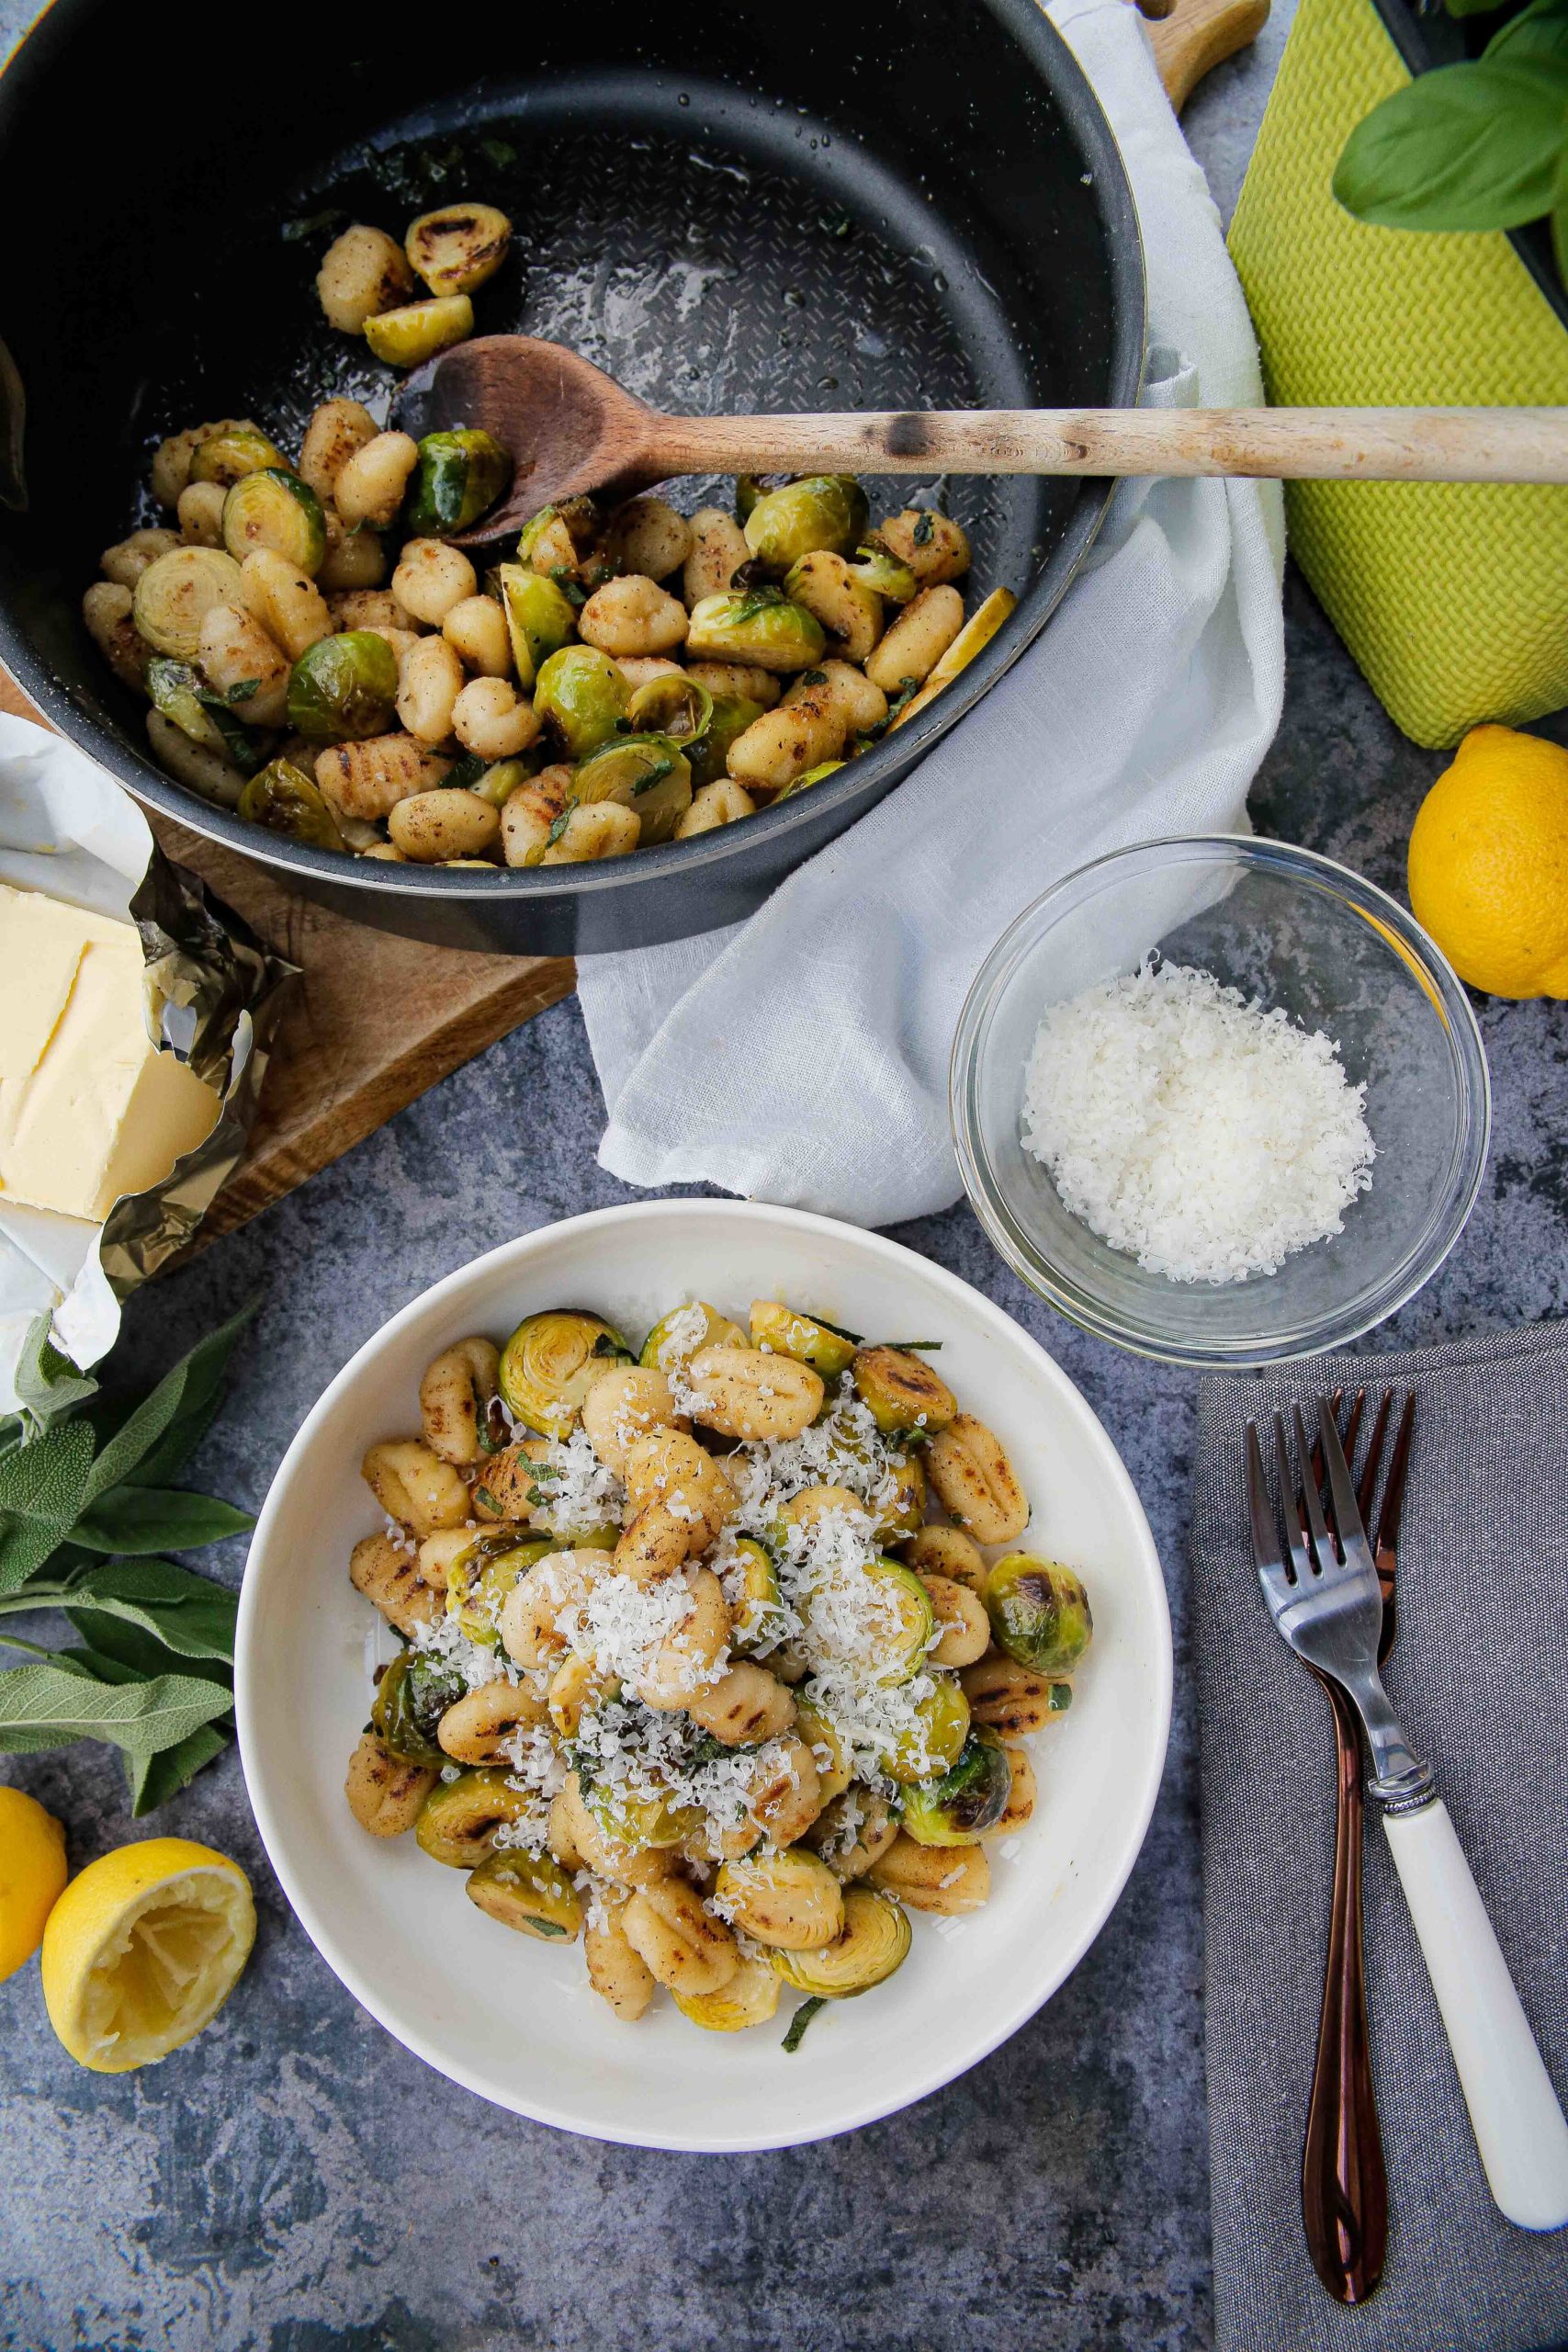 Crispy pan fried gnocchi with tender Brussel's sprouts, hints of lemon and garlic in a rich sage butter sauce. All cooked in one pan for an easy and speedy lunch or cozy evening meal made with just a few, simple ingredients but absolutely full of flavour.